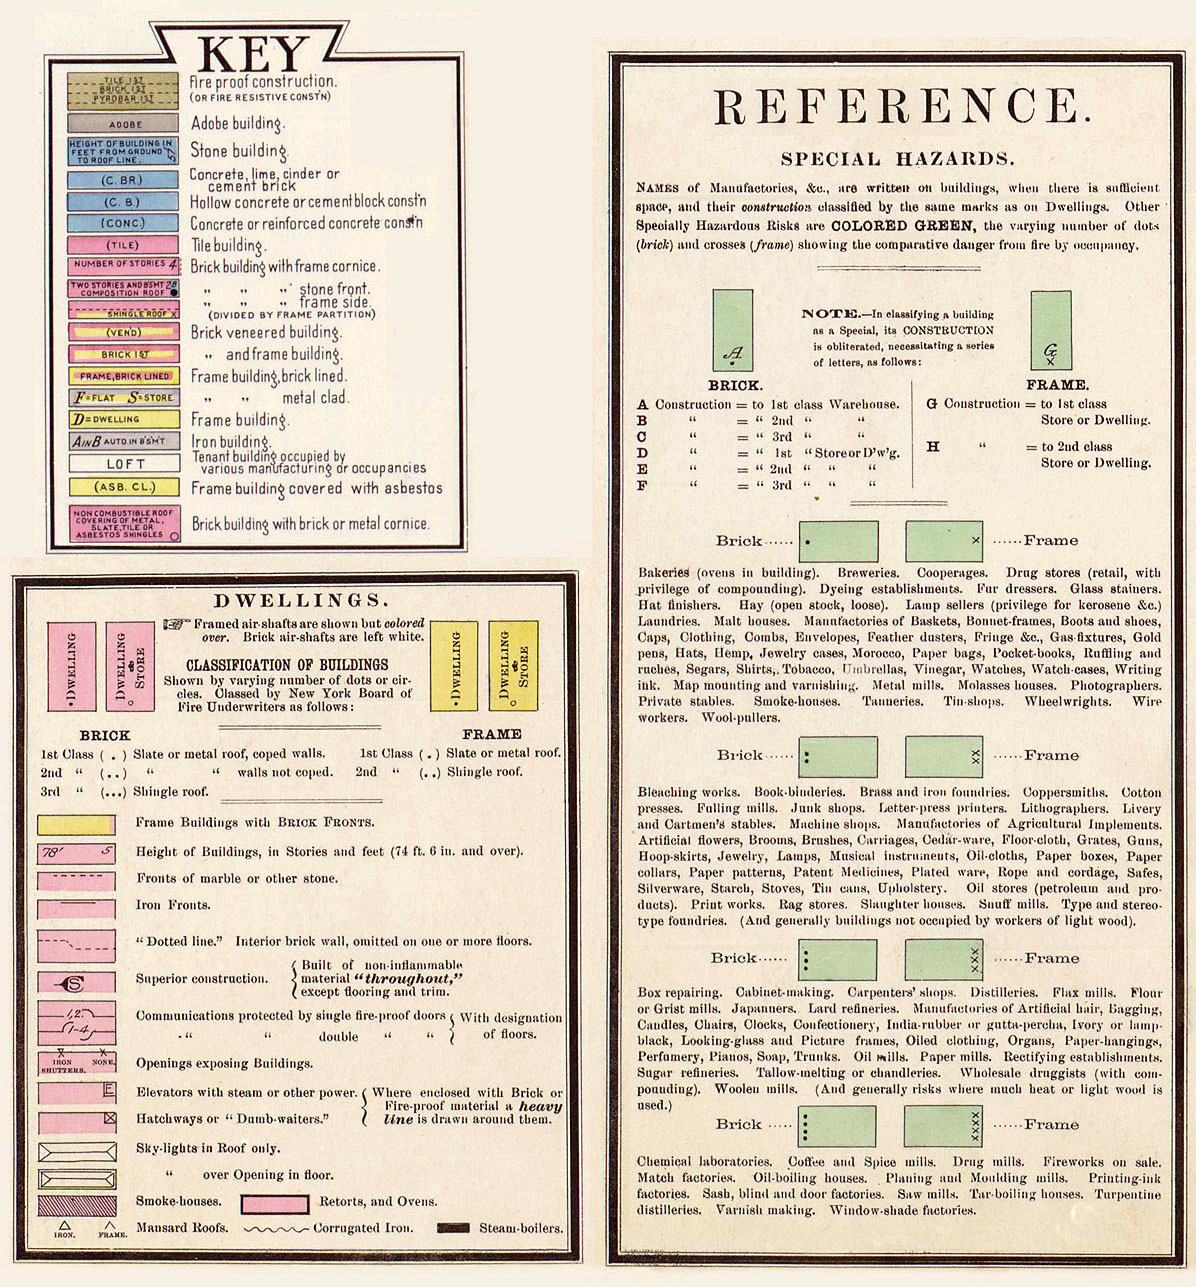 Key and reference diagram to interpret Sanborn maps Courtesy of Library of Congress #insurancemaps #sanbornmaps